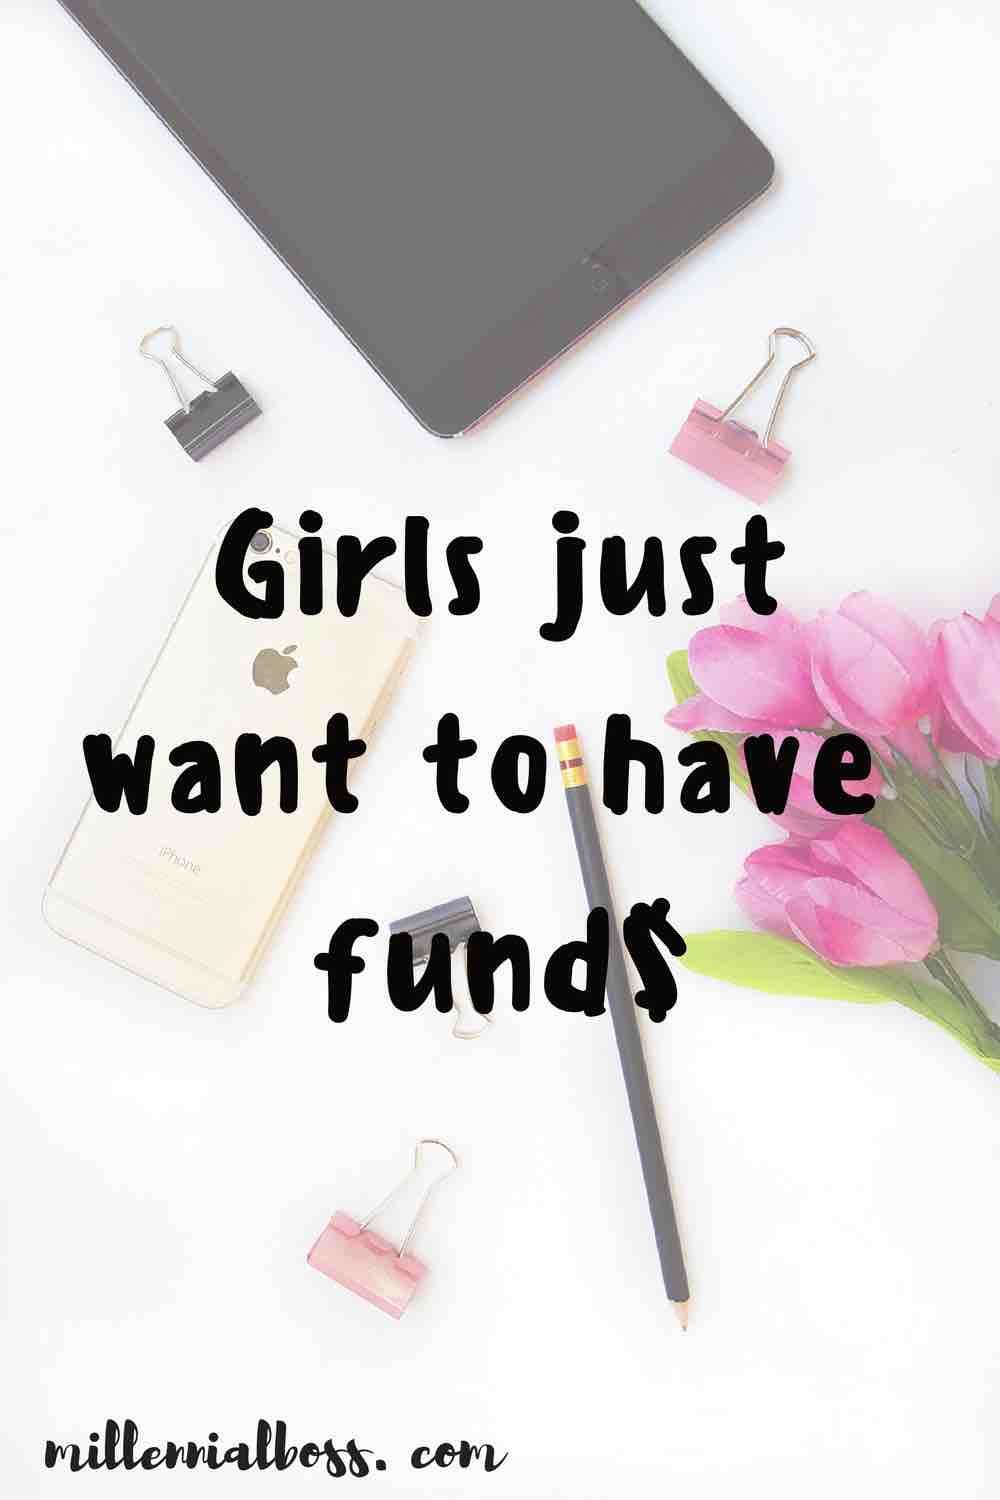 YES!! Girl bosses just want that money! Love it!